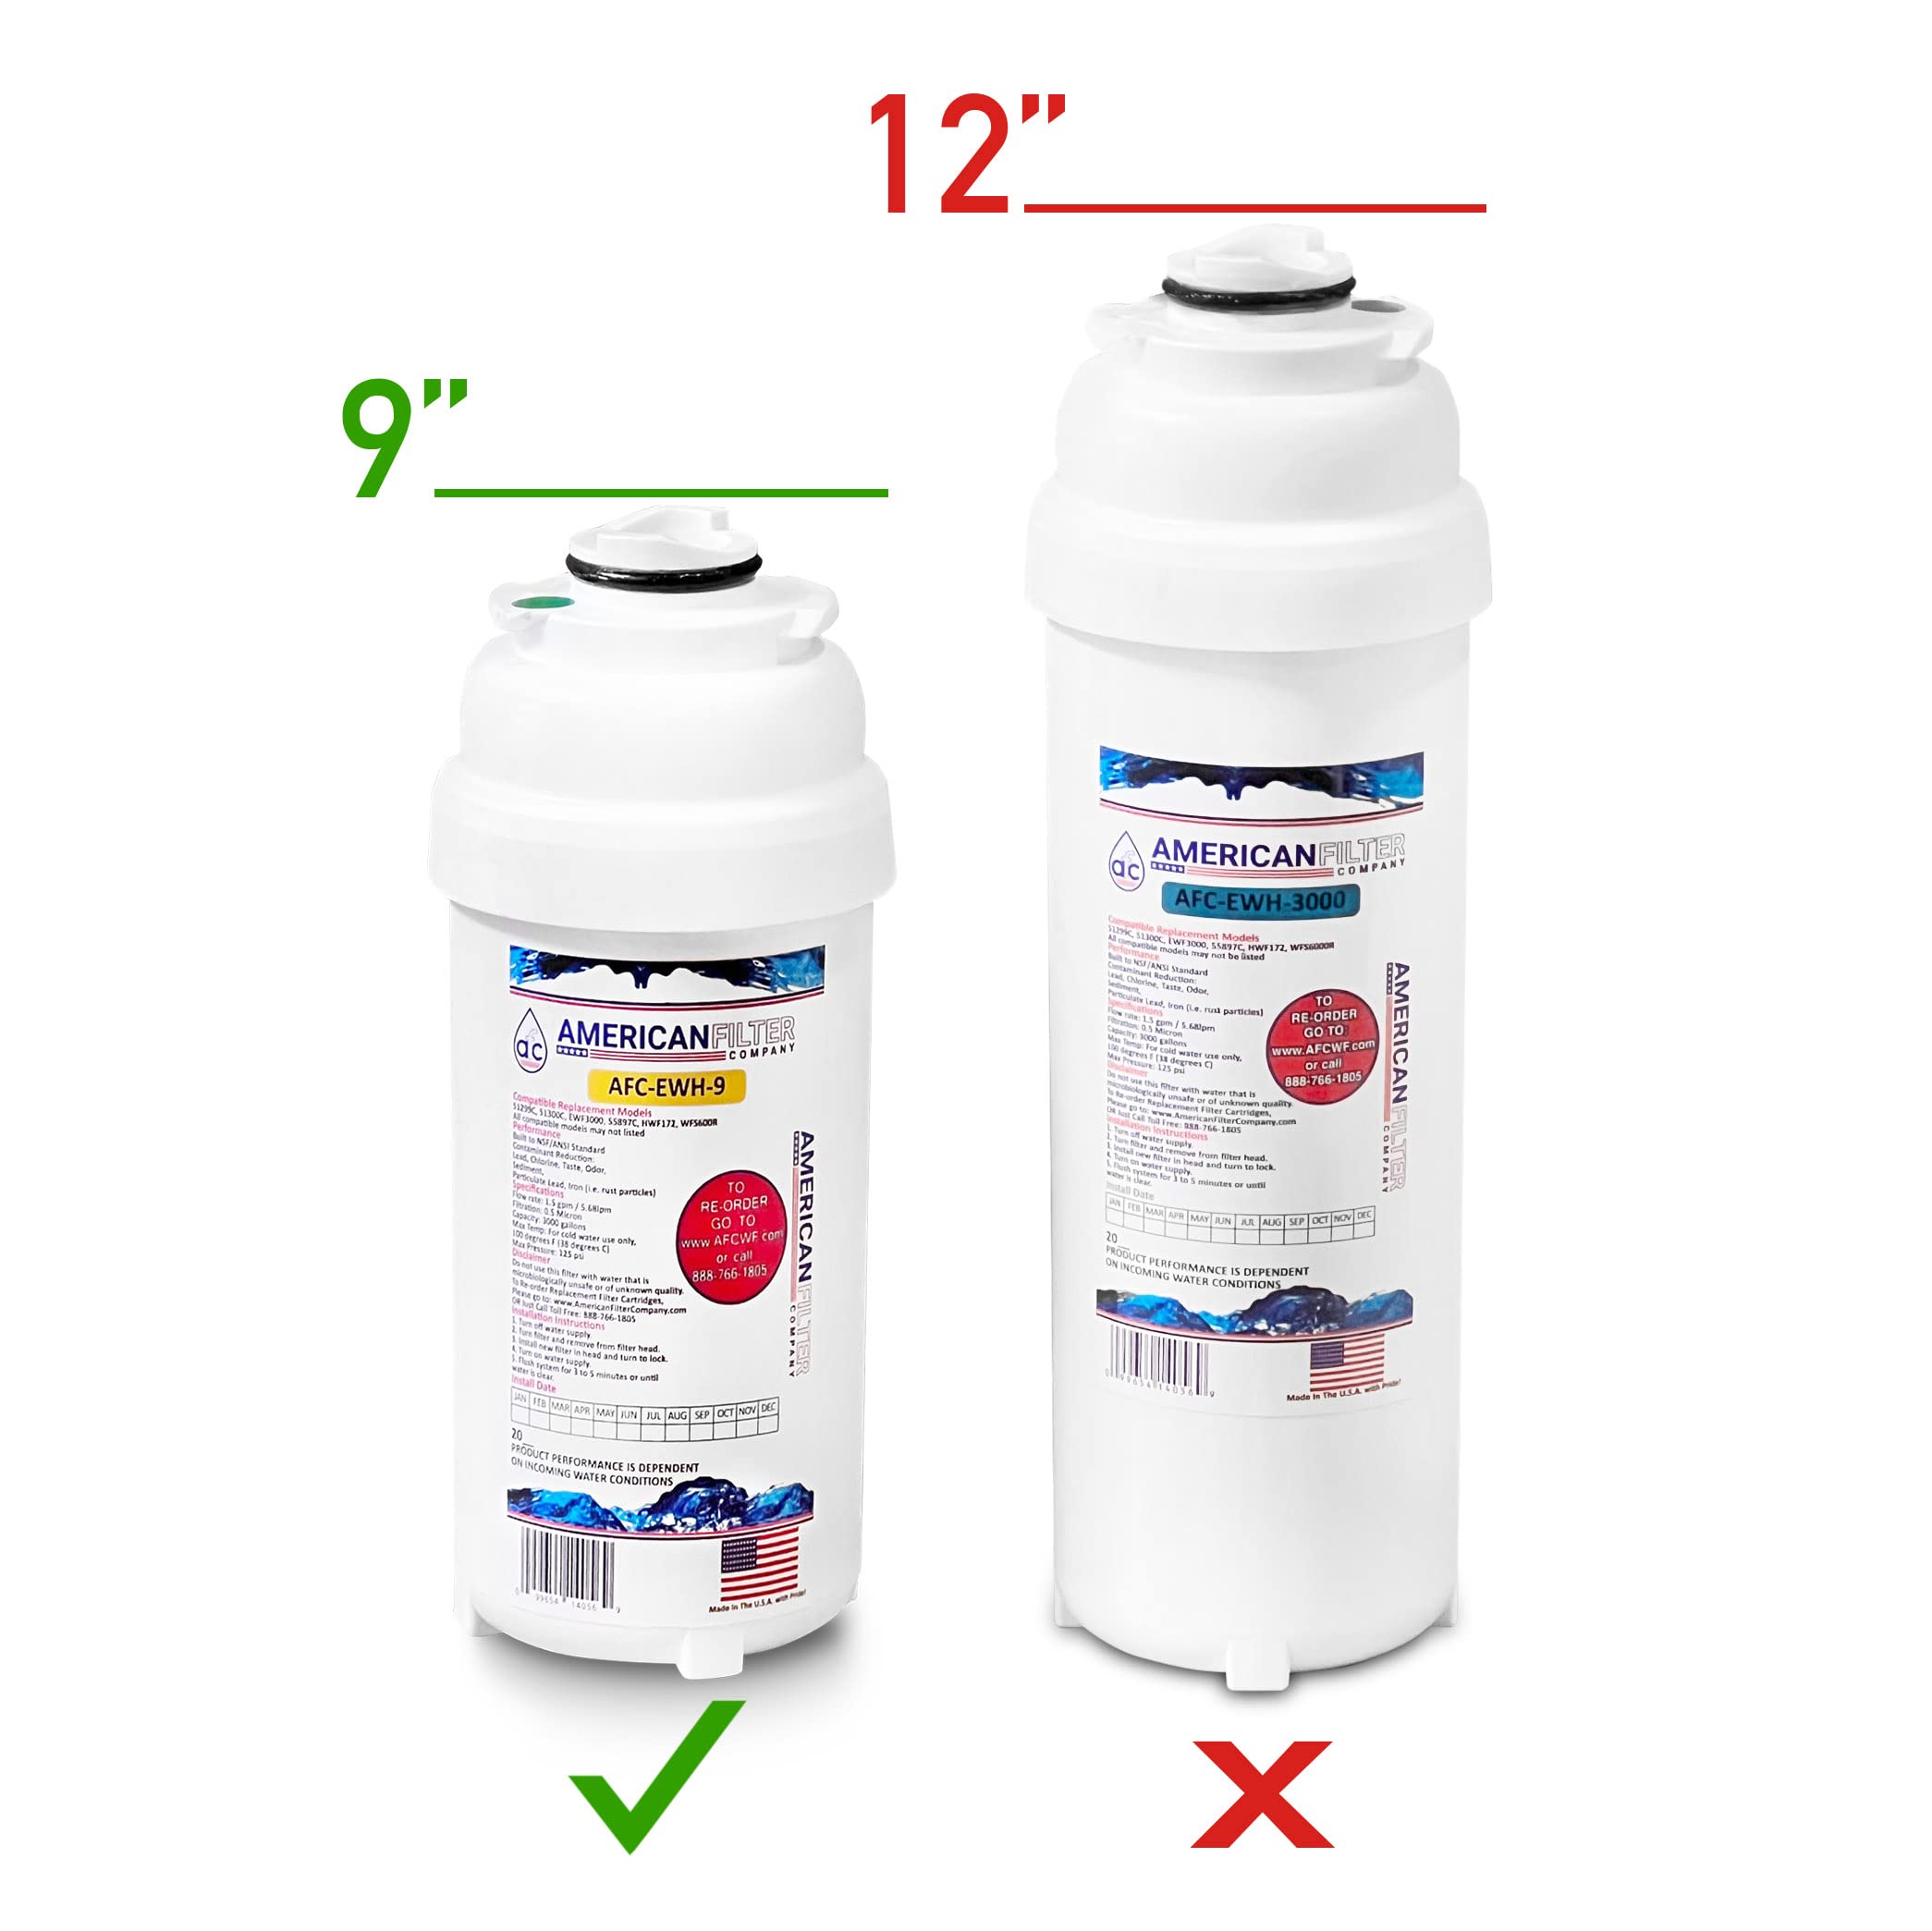 AFC Brand, water filter, Model # AFC-EWH-9, Compatible with HTHB-HAC8PV-NF,HTHB-HAC8SS-NF,HTHB-HACG8BLPV-NF,HTHB-HACG8PV-NF - 12 Pack